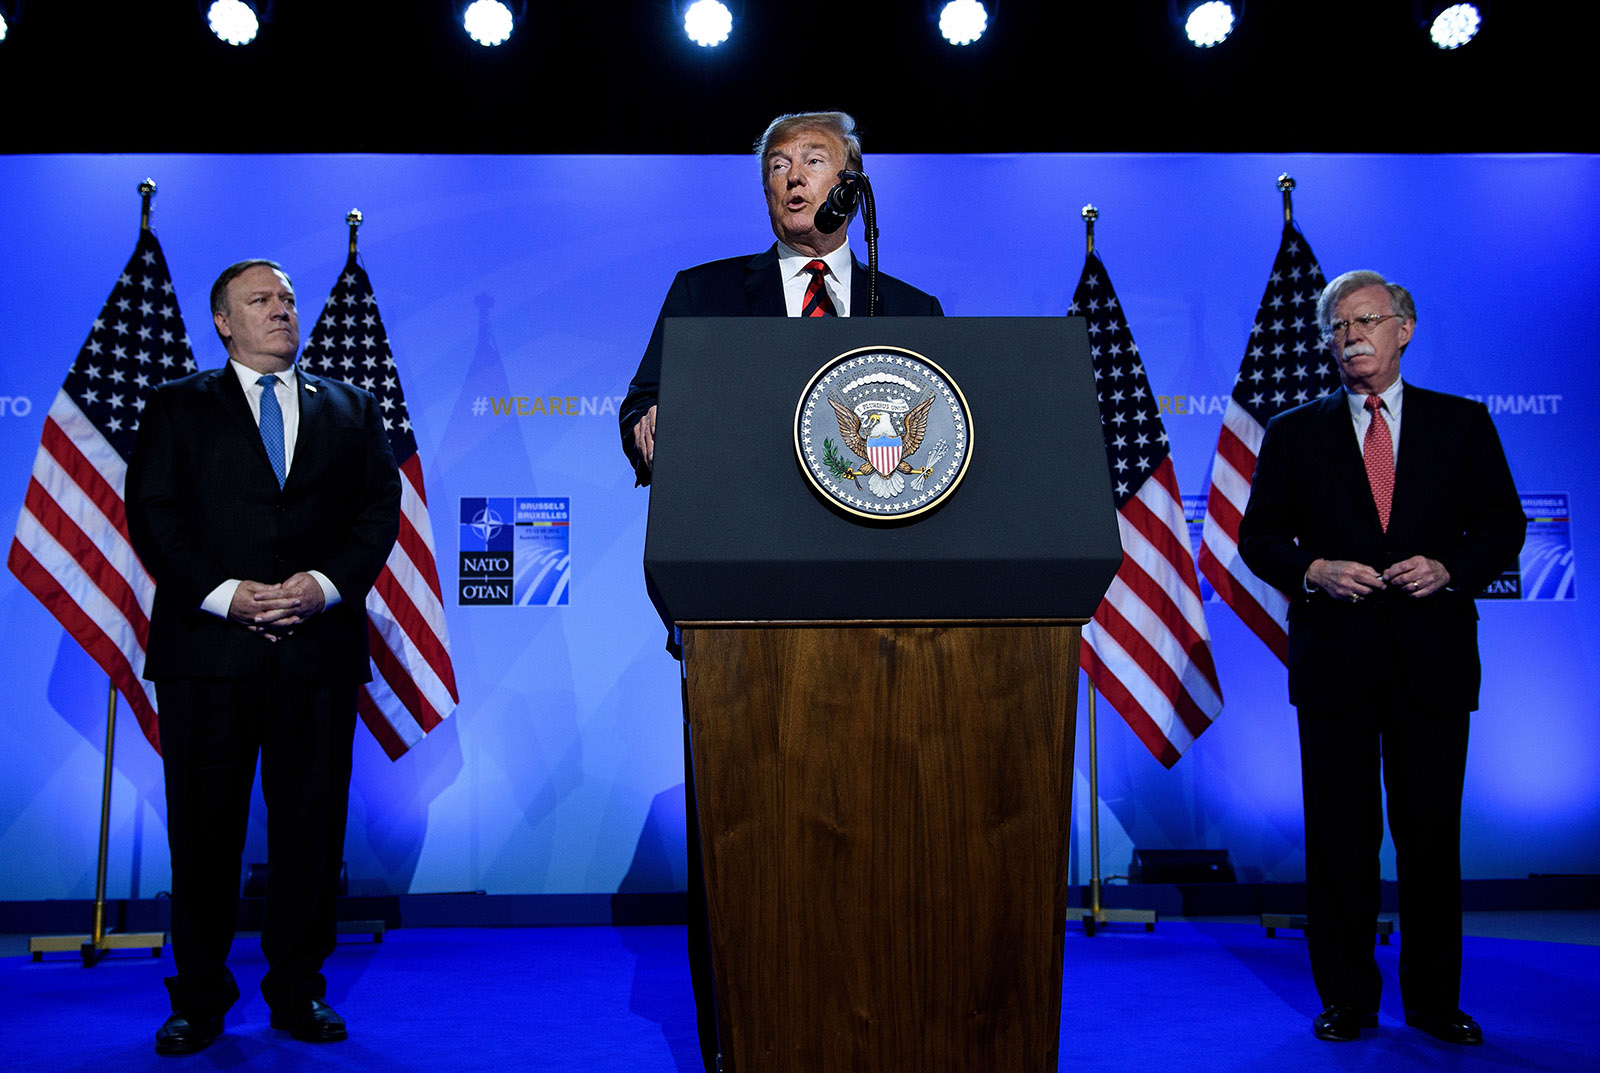 President Trump, flanked by Secretary of State Mike Pompeo and National Security Adviser John Bolton, addressing a press conference at a NATO summit, Brussels, Belgium, July 12, 2018